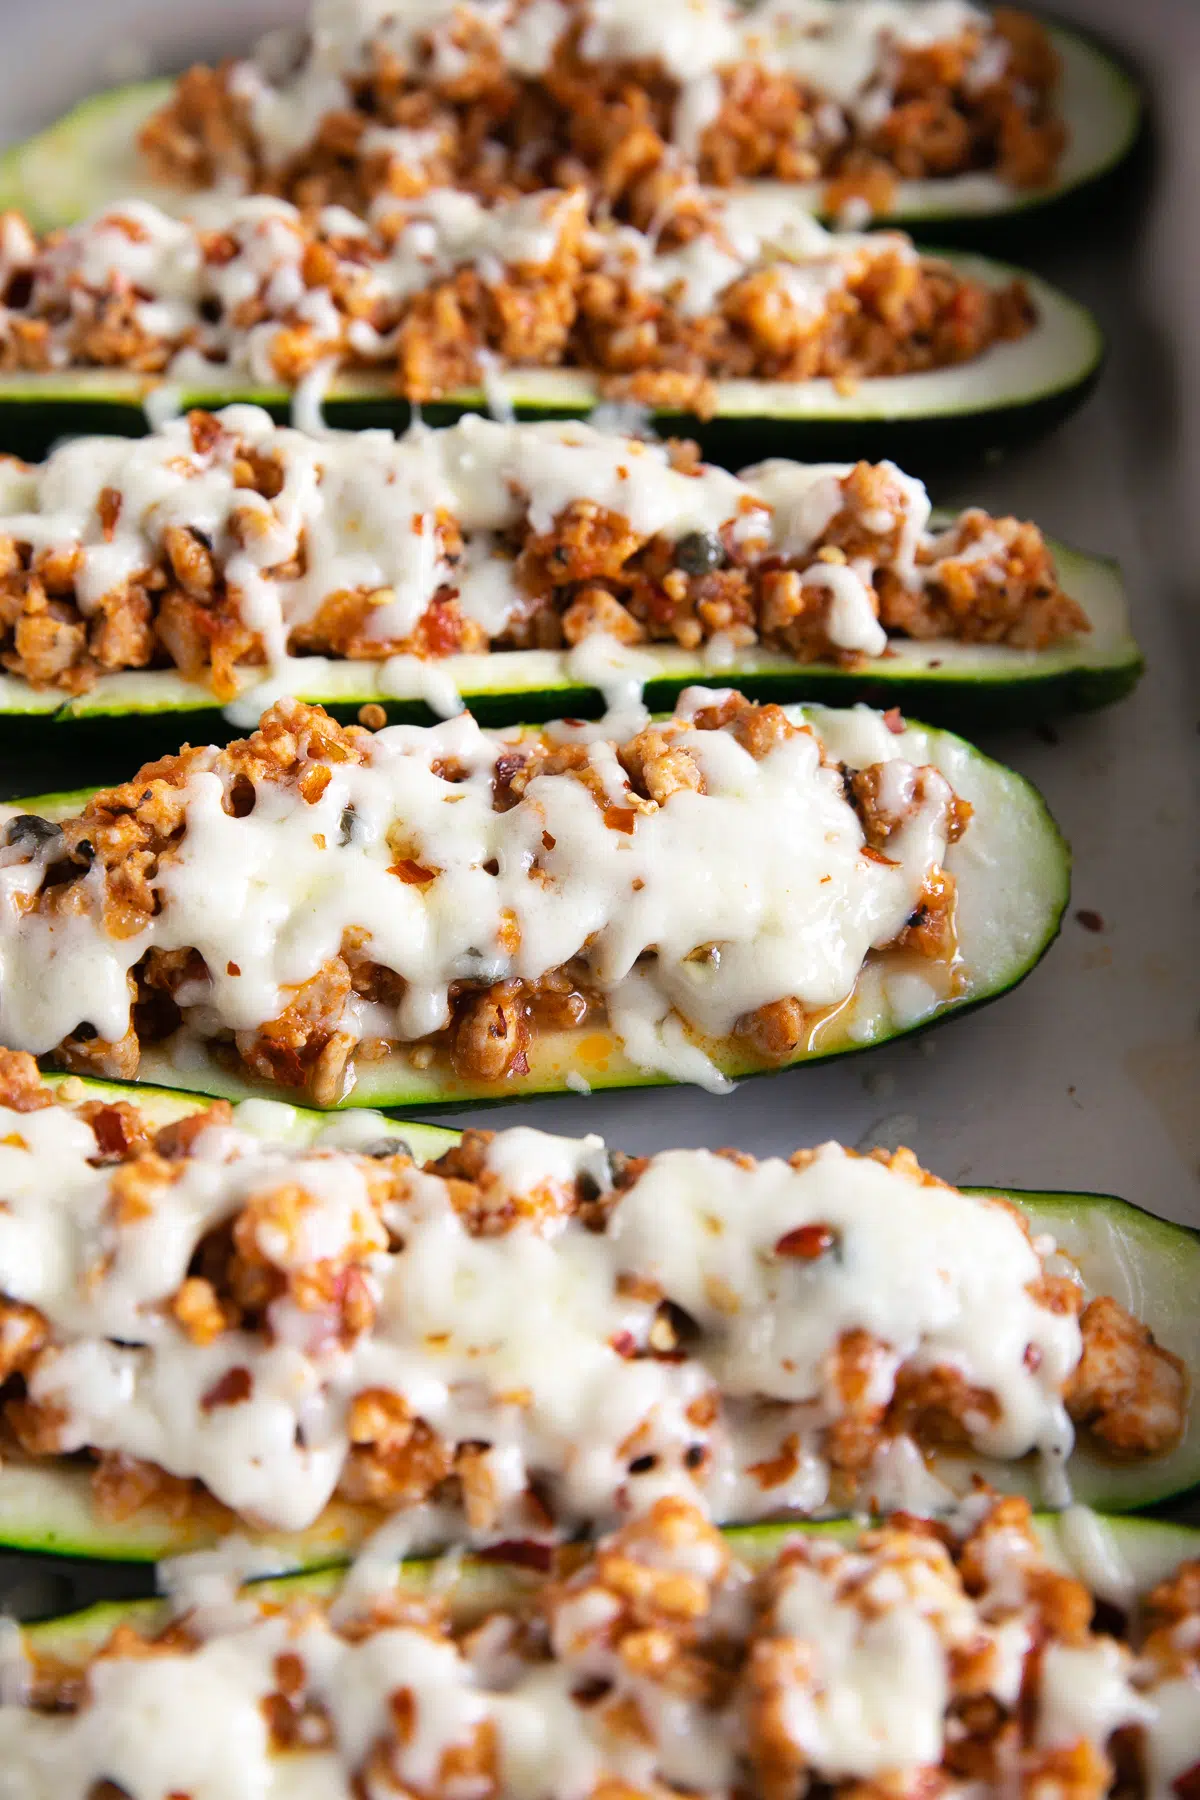 Zucchini boats stuffed with meat and cheese.